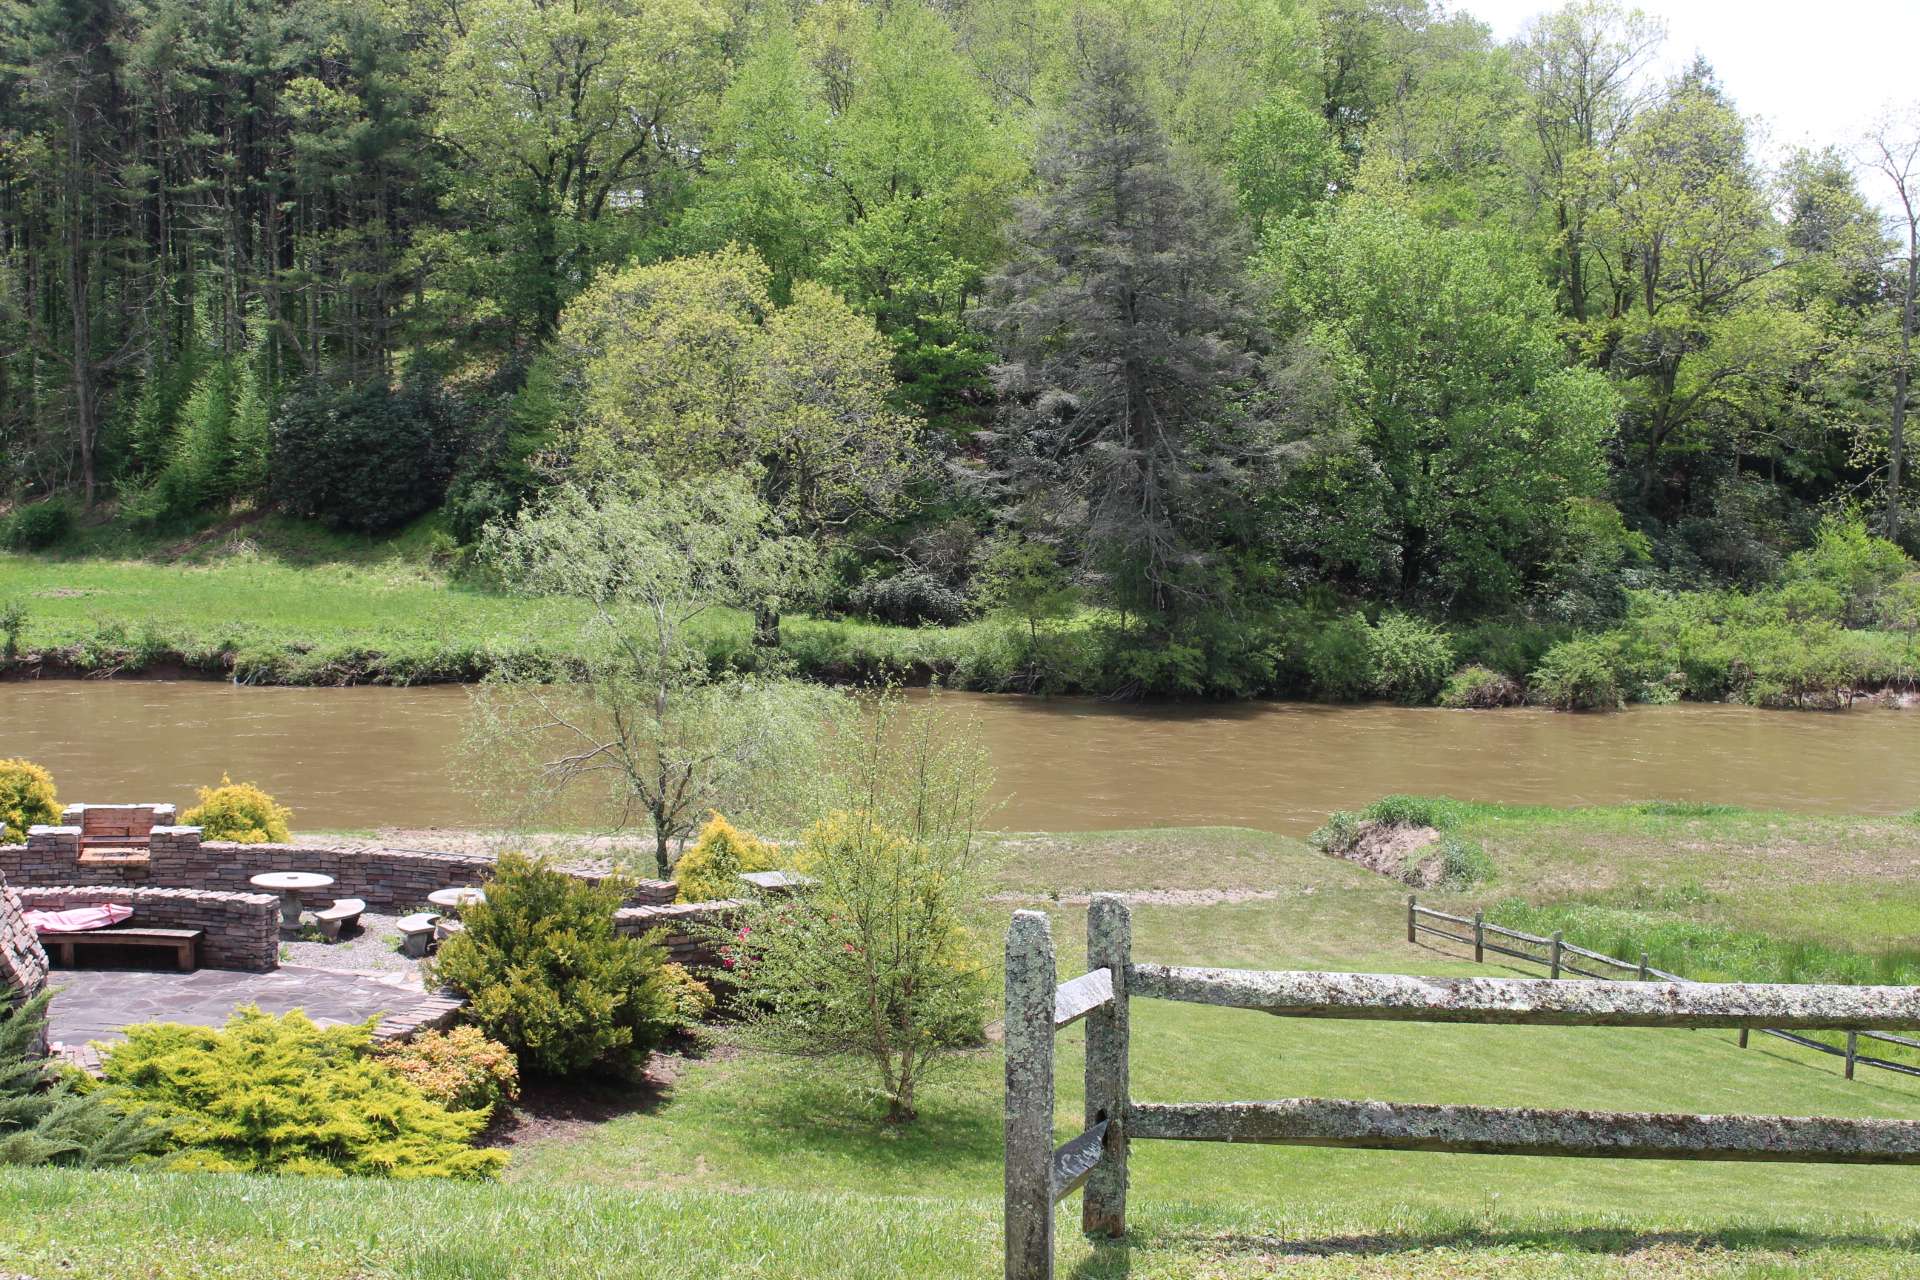 Easy river access for launching your kayaks, canoes, tubes, or your fishing pole.